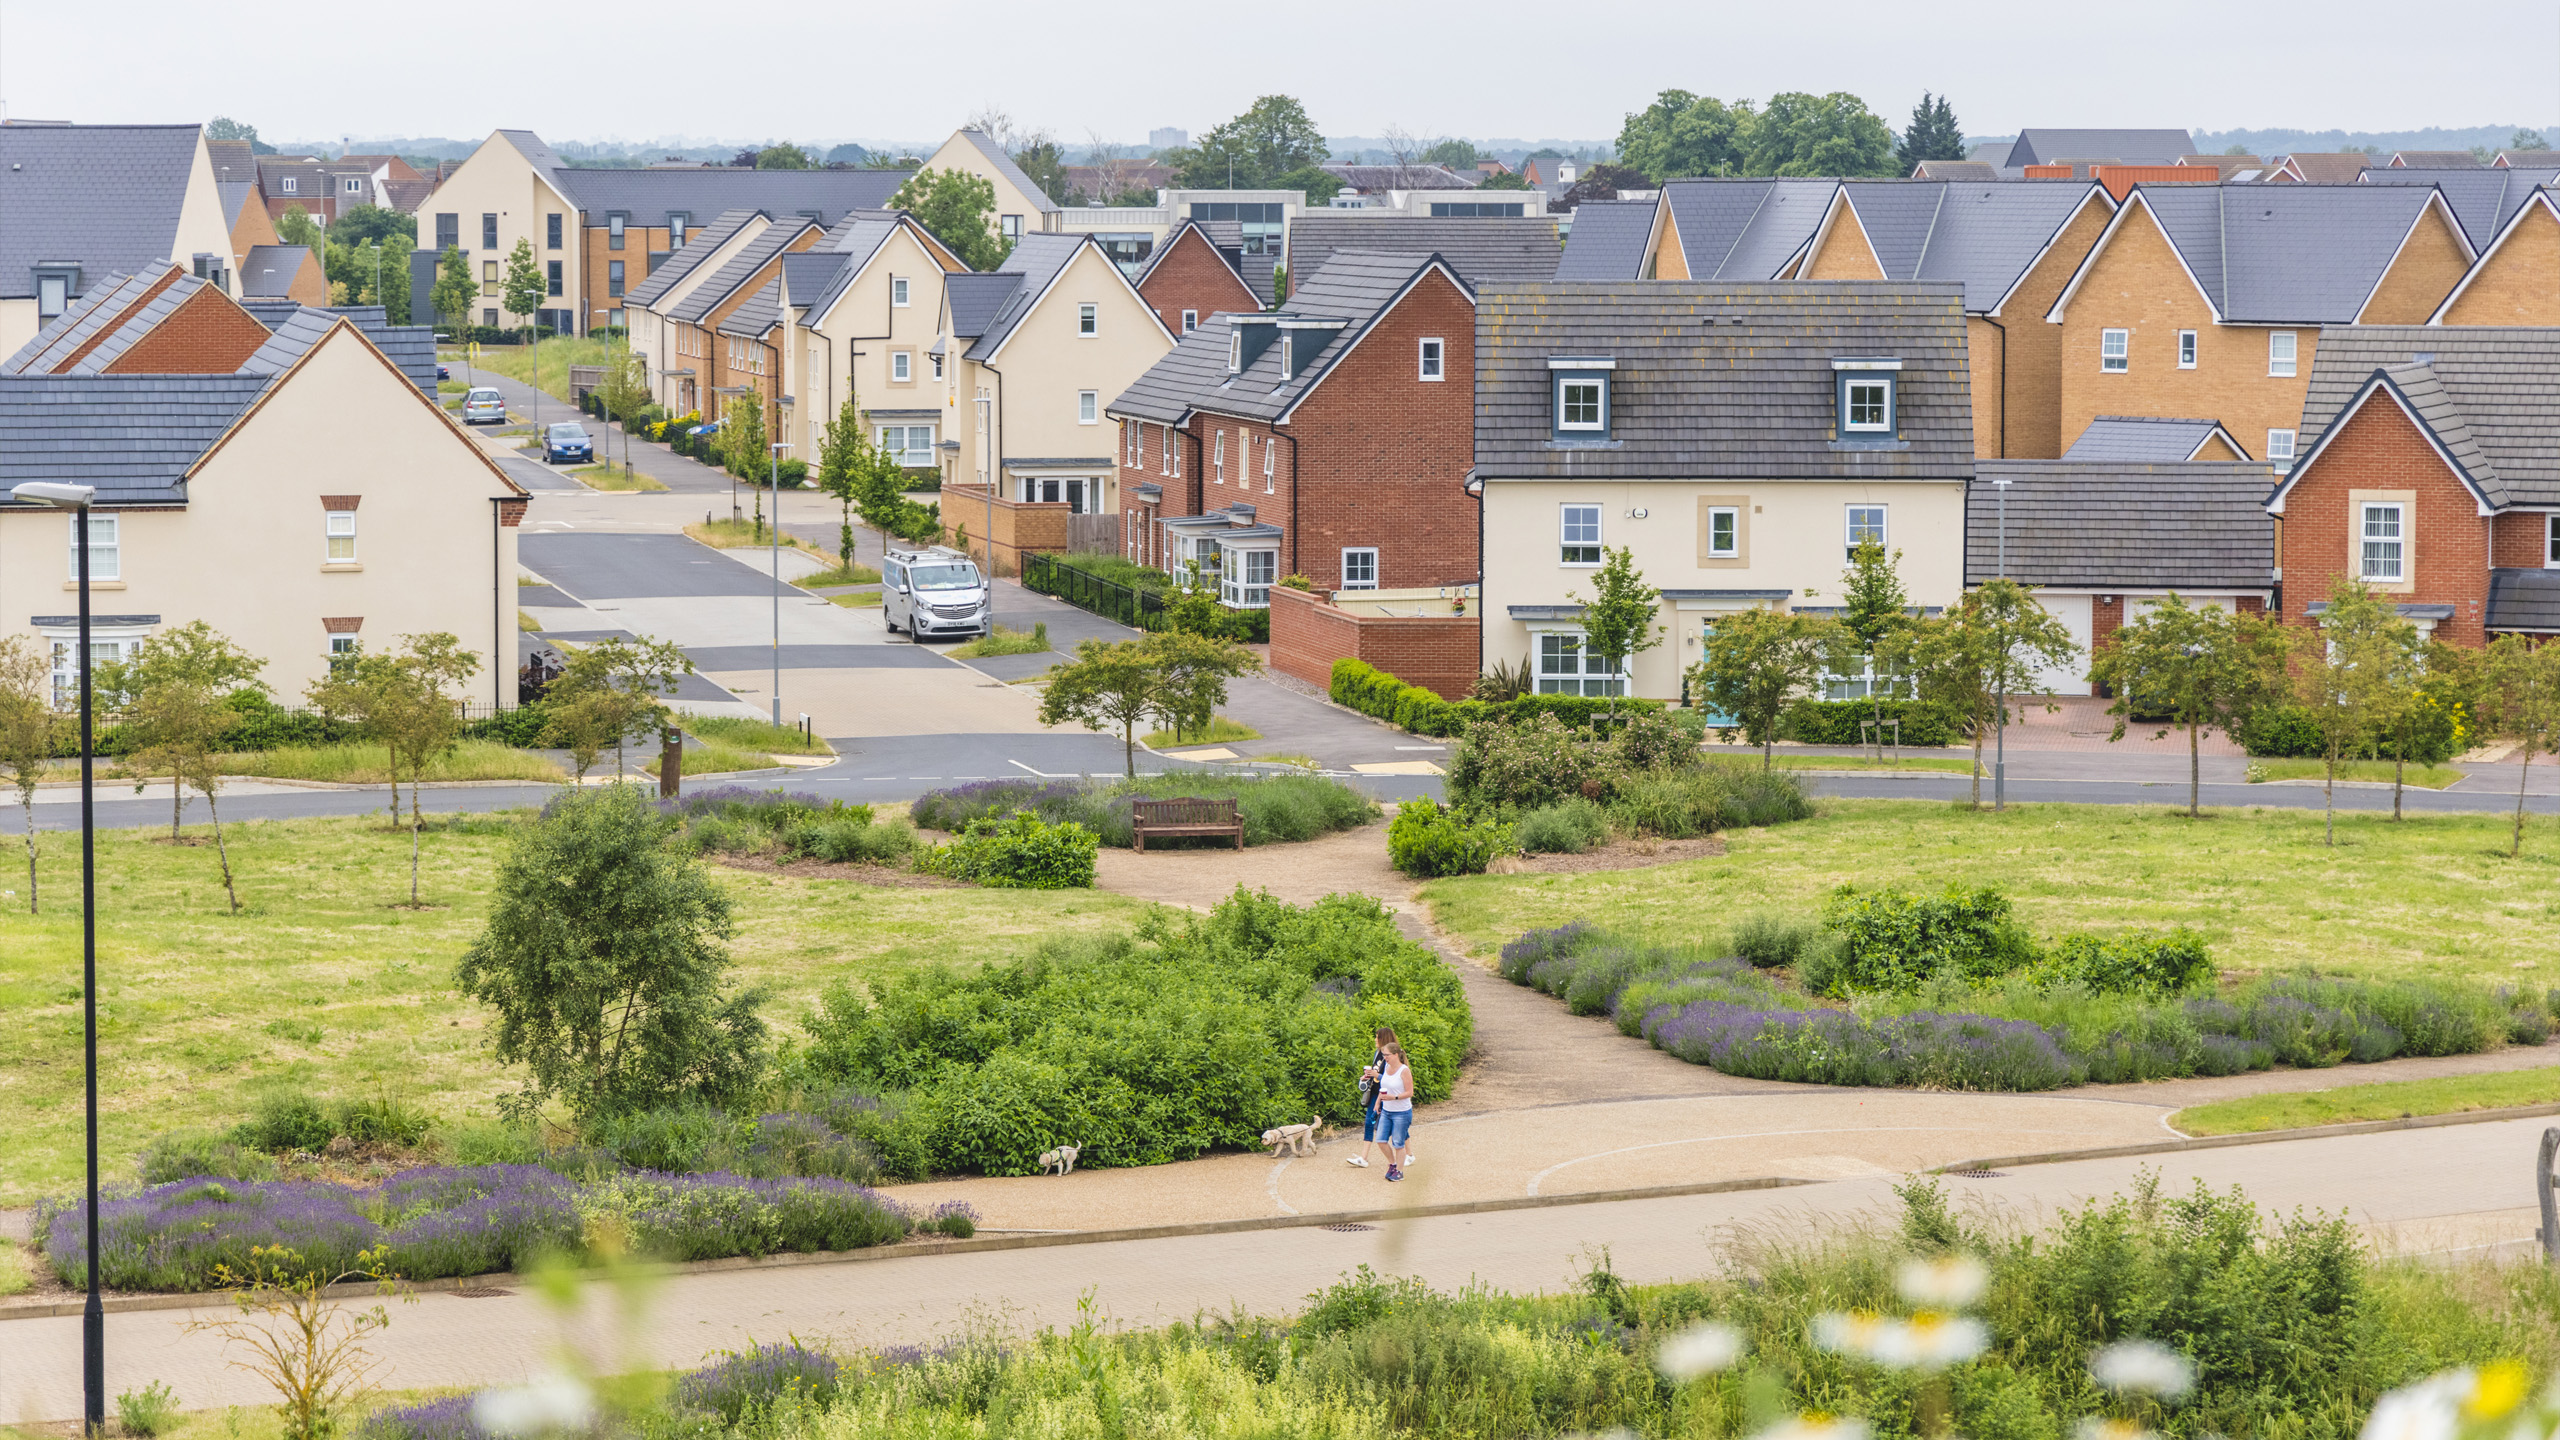 Neighbourhood of new homes with parkland and walking space.